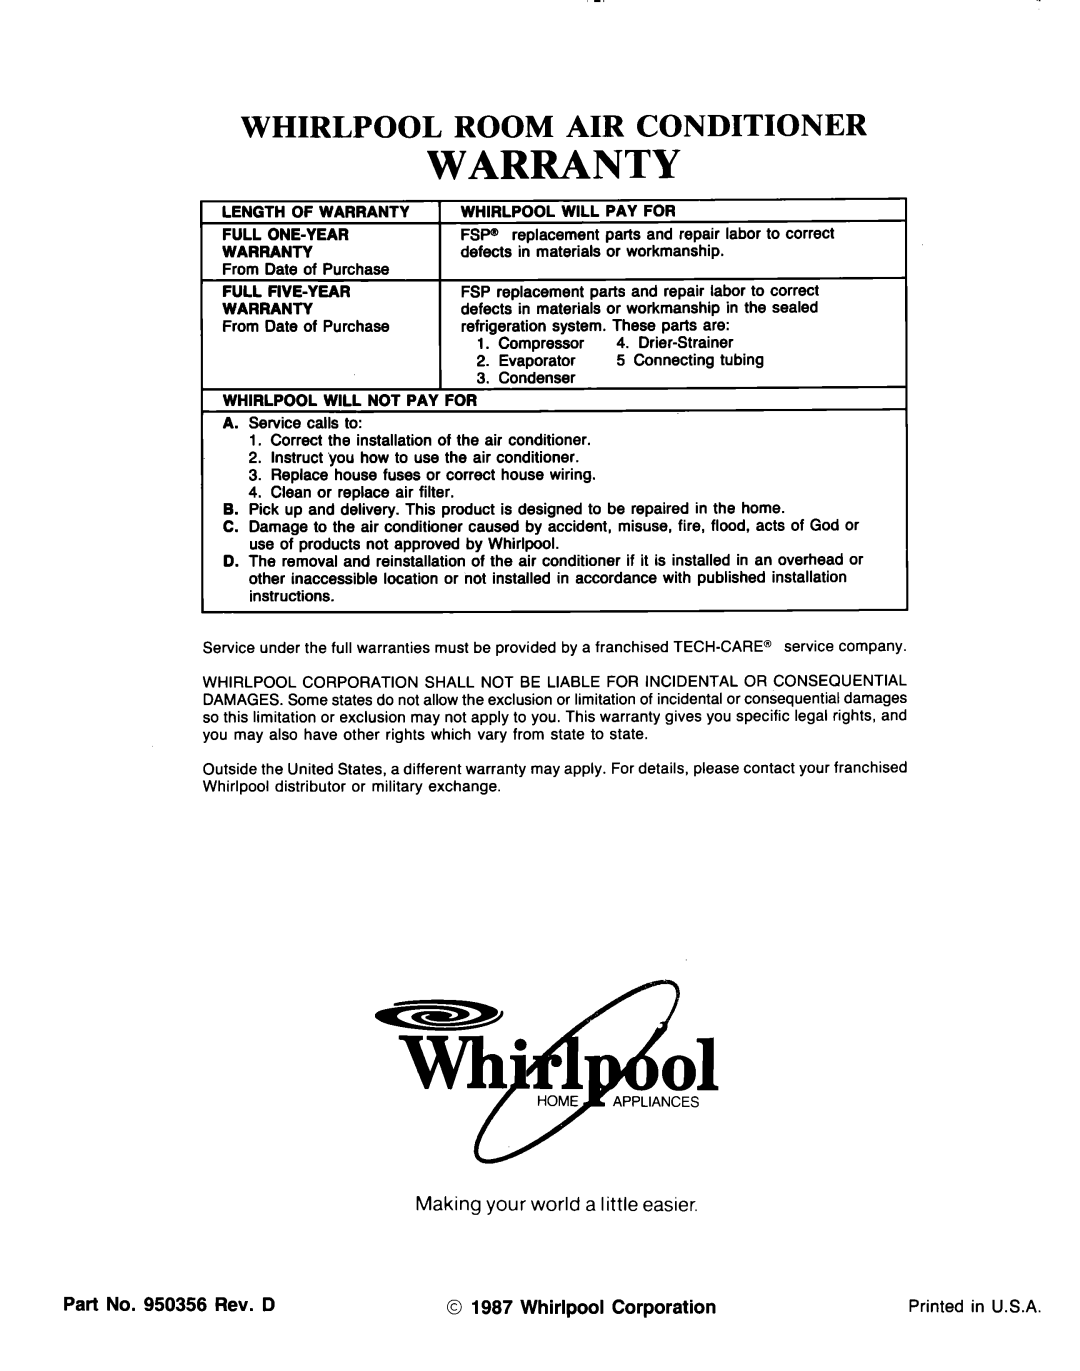 Whirlpool ACE094XM0 Whirlpool, Room, Conditioner, Part No. 950356 Rev. D, Making your world a little easier, Warranty 